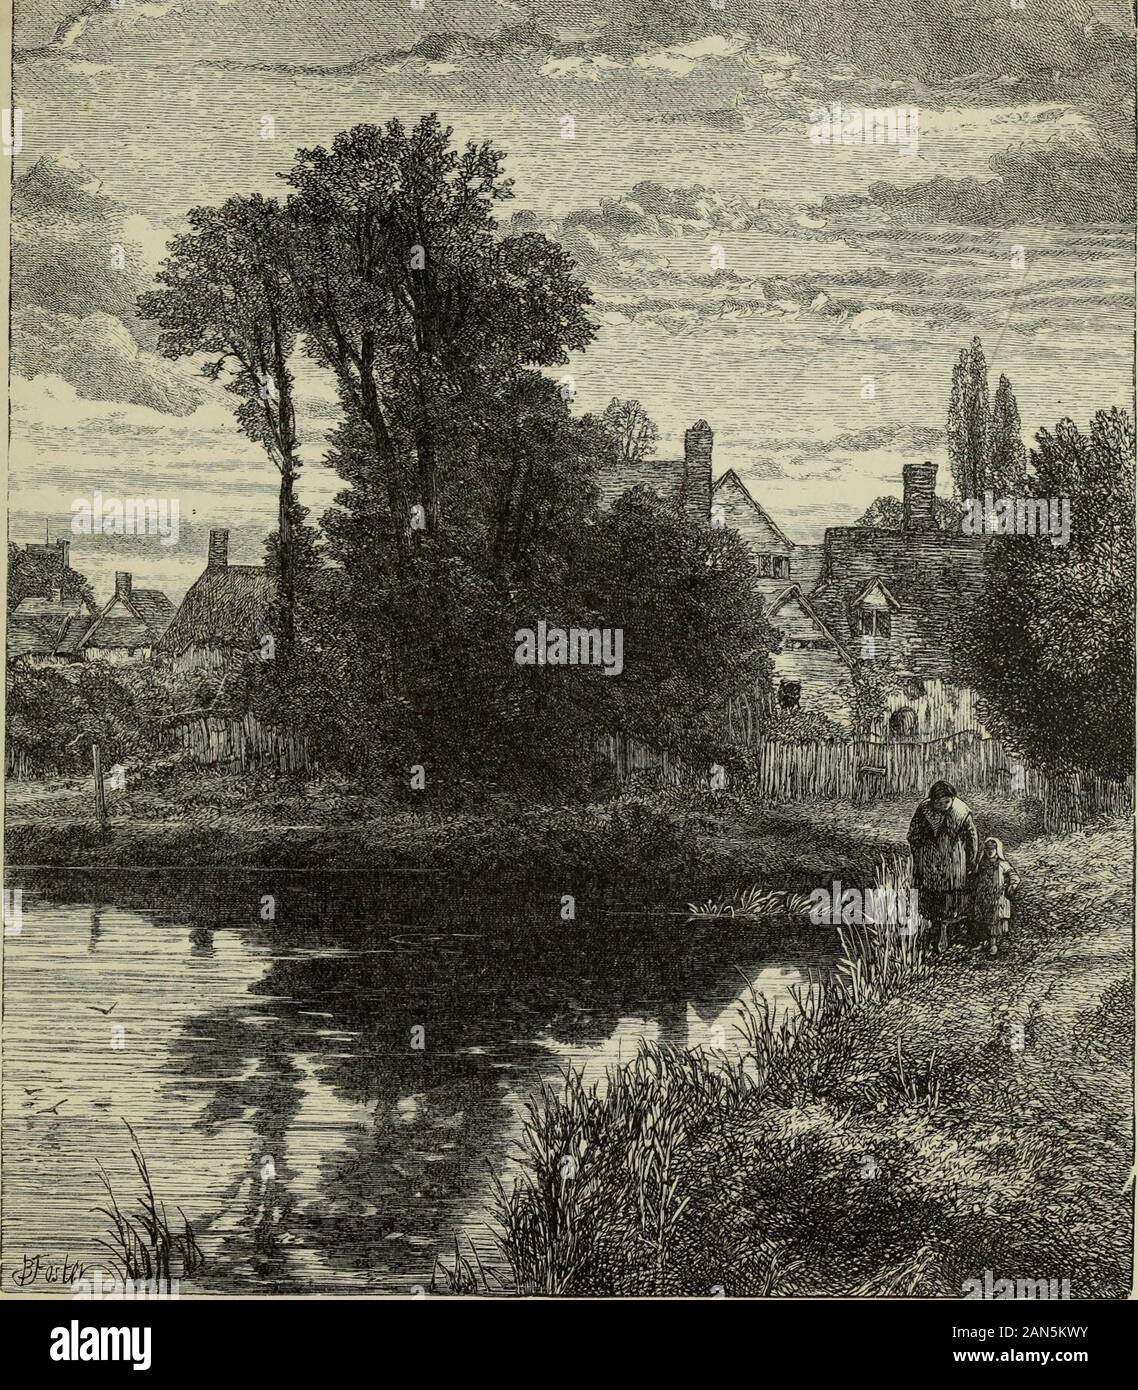 Birket Foster's pictures of English landscape . 26 XXVII. THE VILLAGE CHURCH-YARD. Narrow the bounds of village life and death :The infants cradle, and the elders graveSo near, it seems that those who sleep beneath,And those who play where churchyard grasses wave,Must almost breathe alike the limes sweet breath,And hear the daws clamour round tower and nave. The city churchyard is a ghastly place,High heaped in festering mould, with nettles rankThat clutch and choke in venomous embraceThe tombstones falln awry, and greening dank;Girt by mean houses grudging its foul space,And walls that bulge Stock Photo